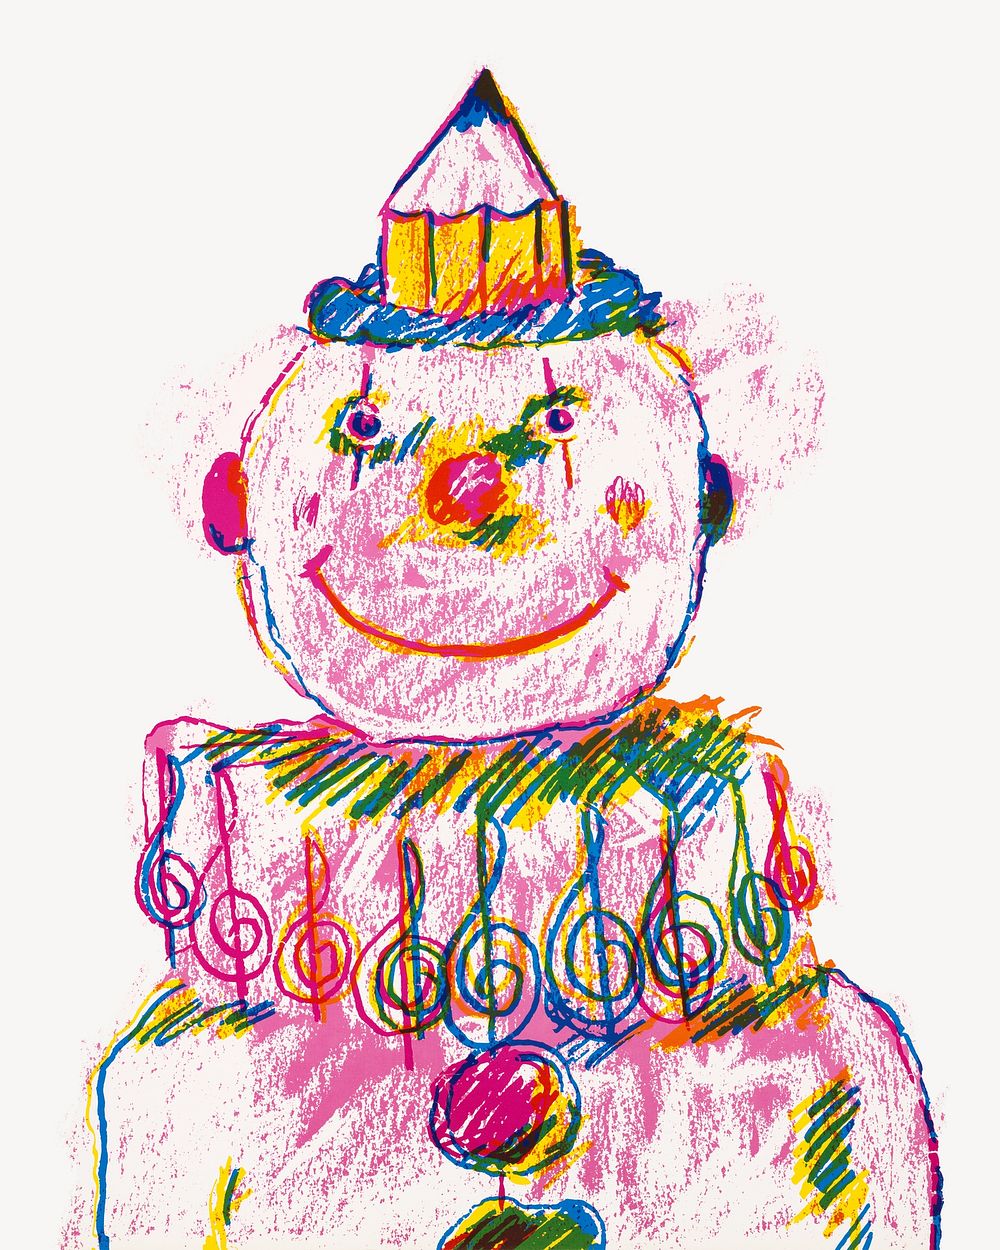 Clown doodle illustration.  Remixed by rawpixel.